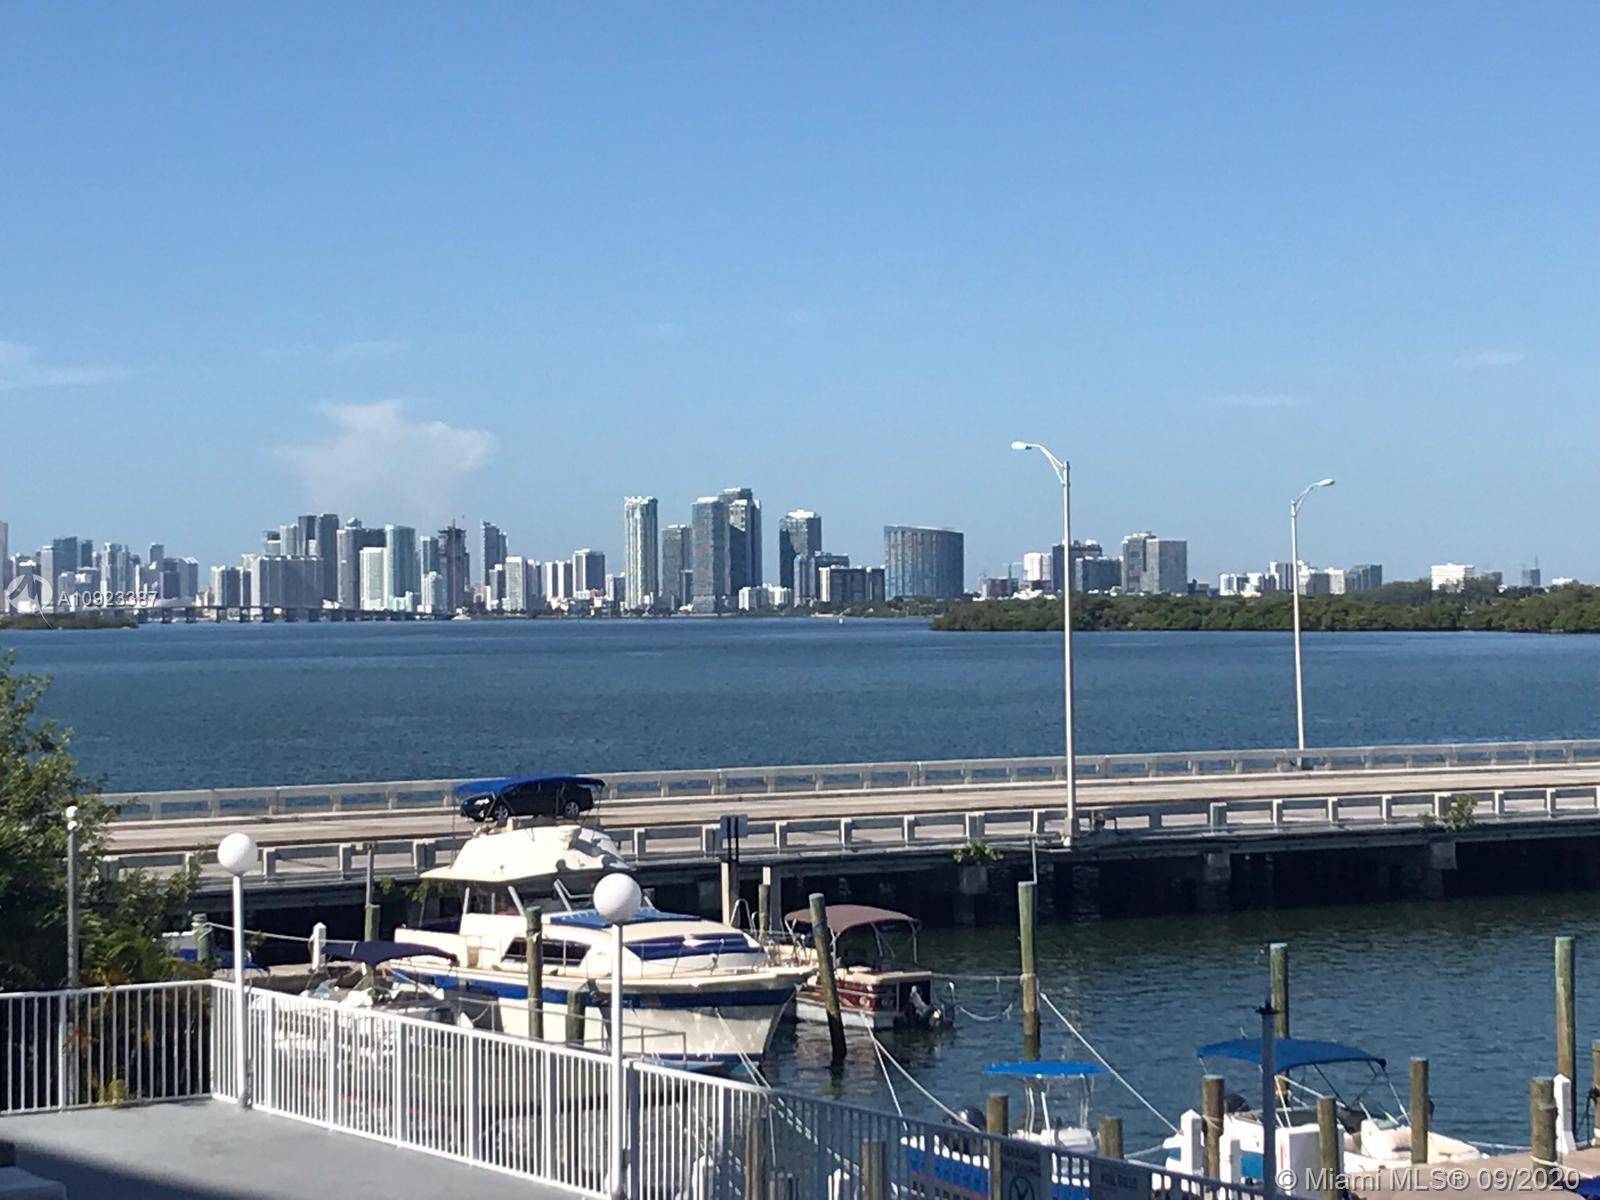 Do not miss excellent opportunity, beautiful apartment remodeled, stainless steel appliances, SEASON RENT, GOOD INVESTMENT, THE UNIT IS SOLD FURNISHED, view biscayne bay, NO RENTAL RESTRICTIONS, 7 minutes from the ...